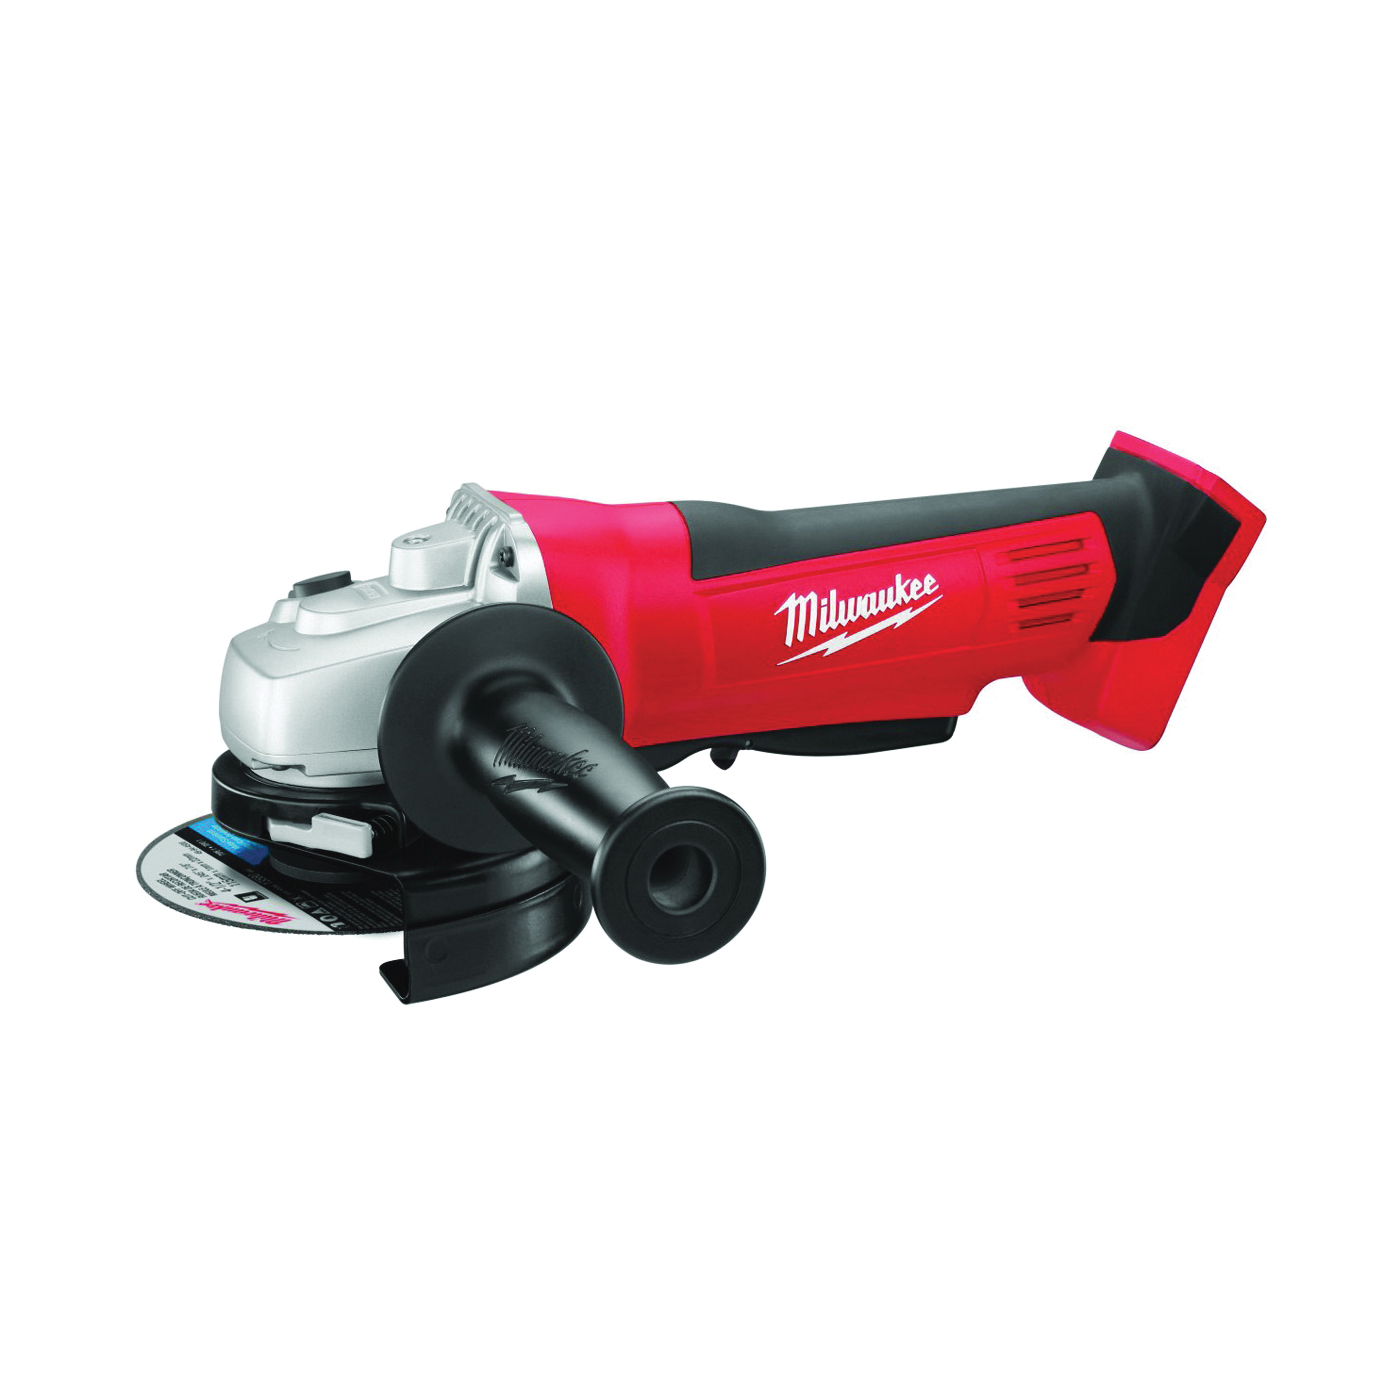 M18 2680-20 Cut-Off Grinder, Tool Only, 18 V, 1.4 Ah, 5/8-11 Spindle, 4-1/2 in Dia Wheel, 9000 rpm Speed